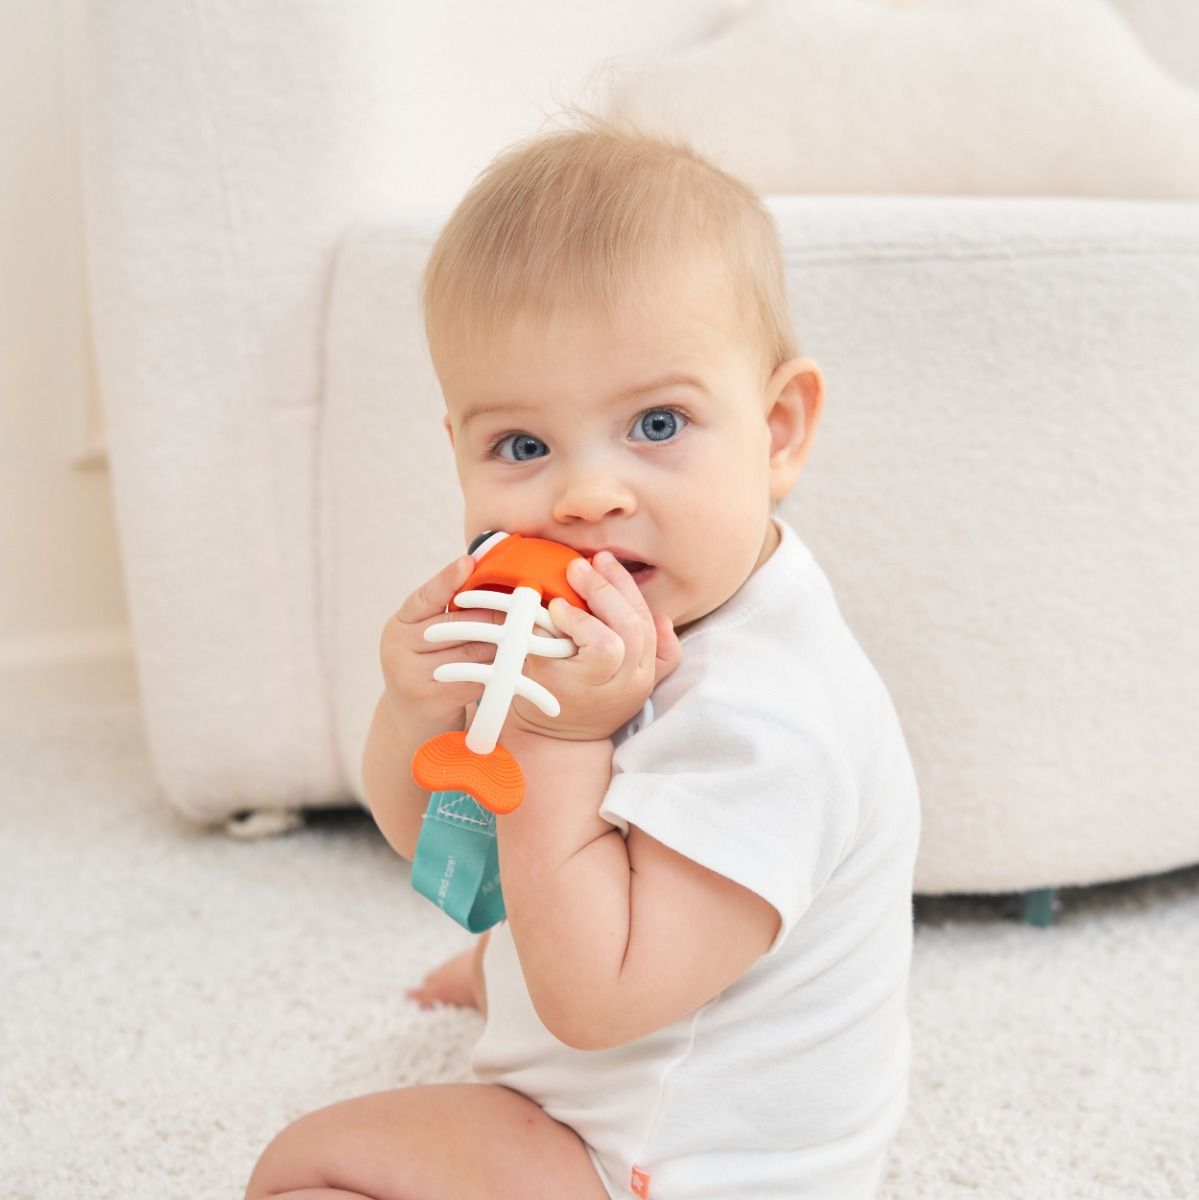 Mombella | Clown Fish Soothing Teether